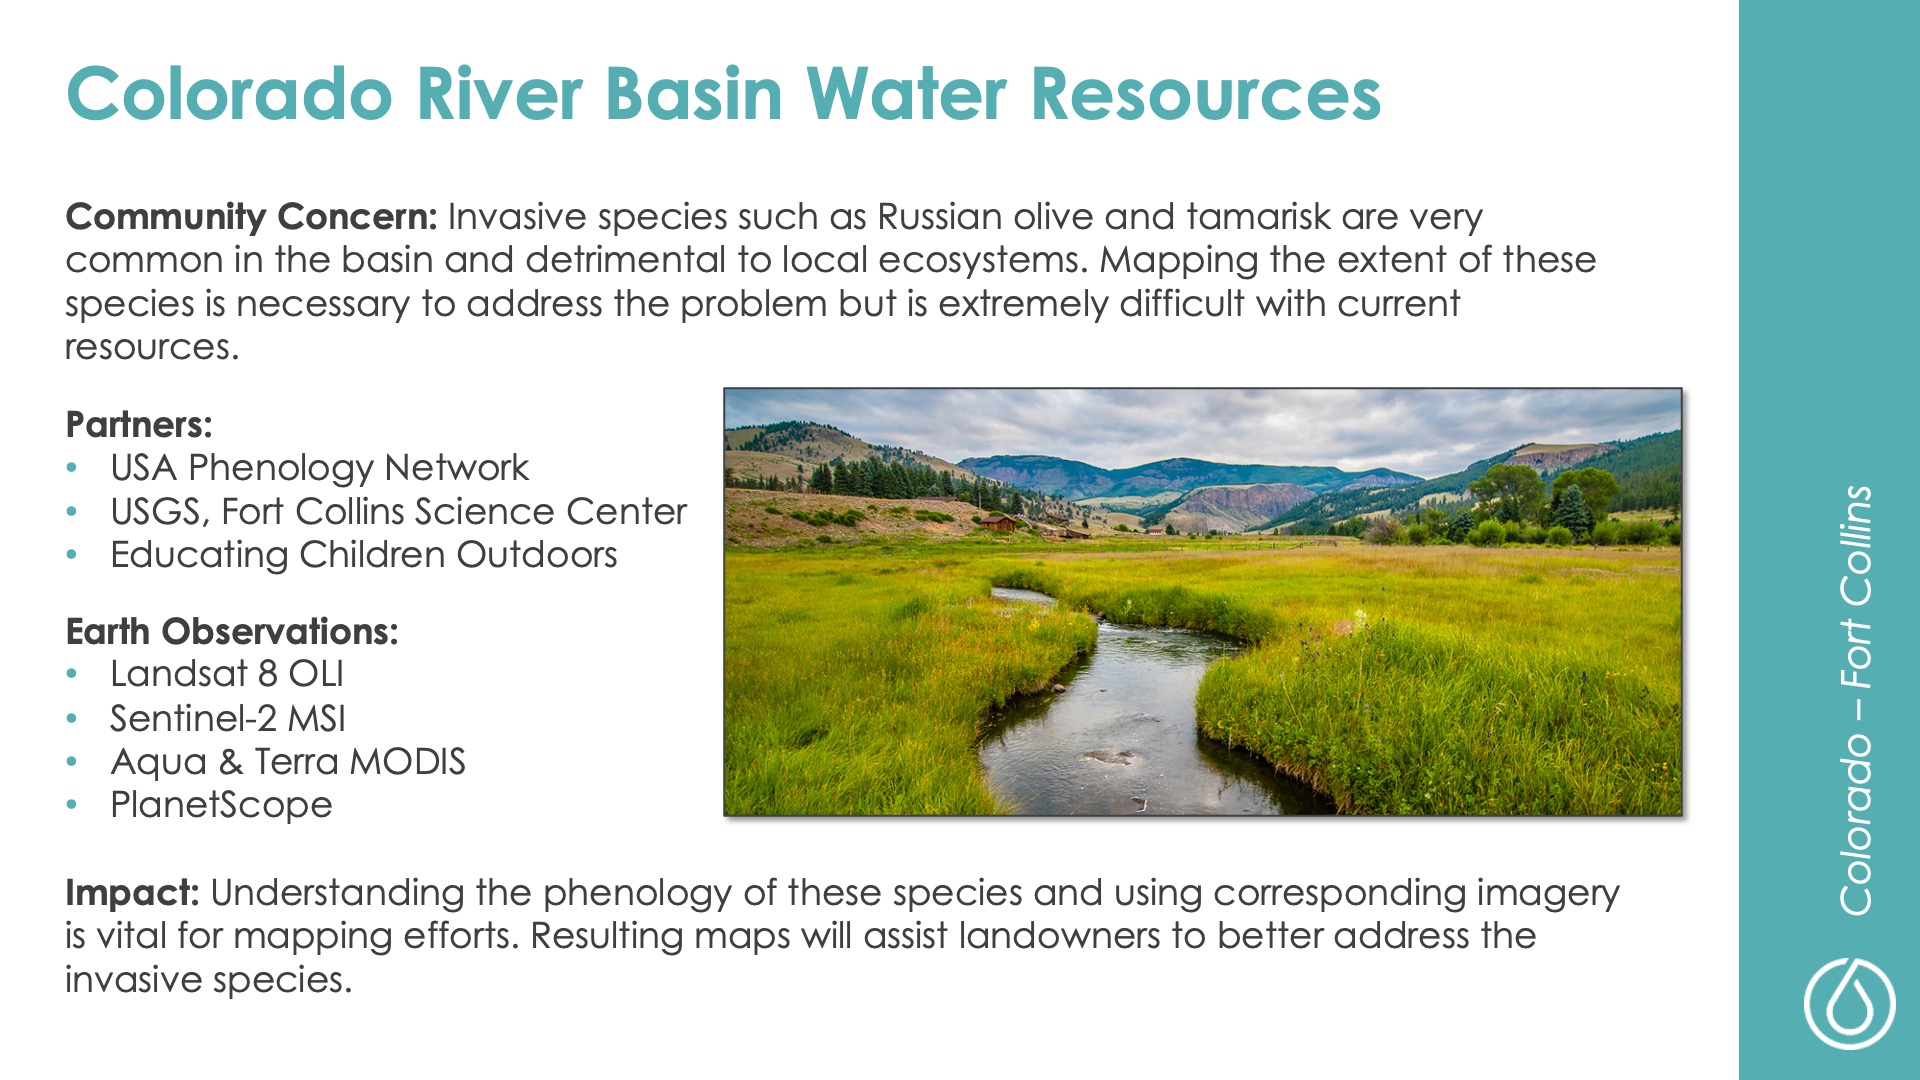 Slide title: Colorado River Basin Water ResourcesDEVELOP Node: Colorado - Fort CollinsCommunity Concern: Invasive species such as Russian olive and tamarisk are very common in the basin and detrimental to local ecosystems. Mapping the extent of these species is necessary to address the problem but is extremely difficult with current resources.Impact: Understanding the phenology of these species and using corresponding imagery is vital for mapping efforts. Resulting maps will assist landowners to better address the invasive species.Partners: USA Phenology Network, USGS, Fort Collins Science Center, Educating Children OutdoorsEarth Observations: Landsat 8 OLI, Sentinel-2 MSI, Aqua & Terra MODIS, PlanetScope